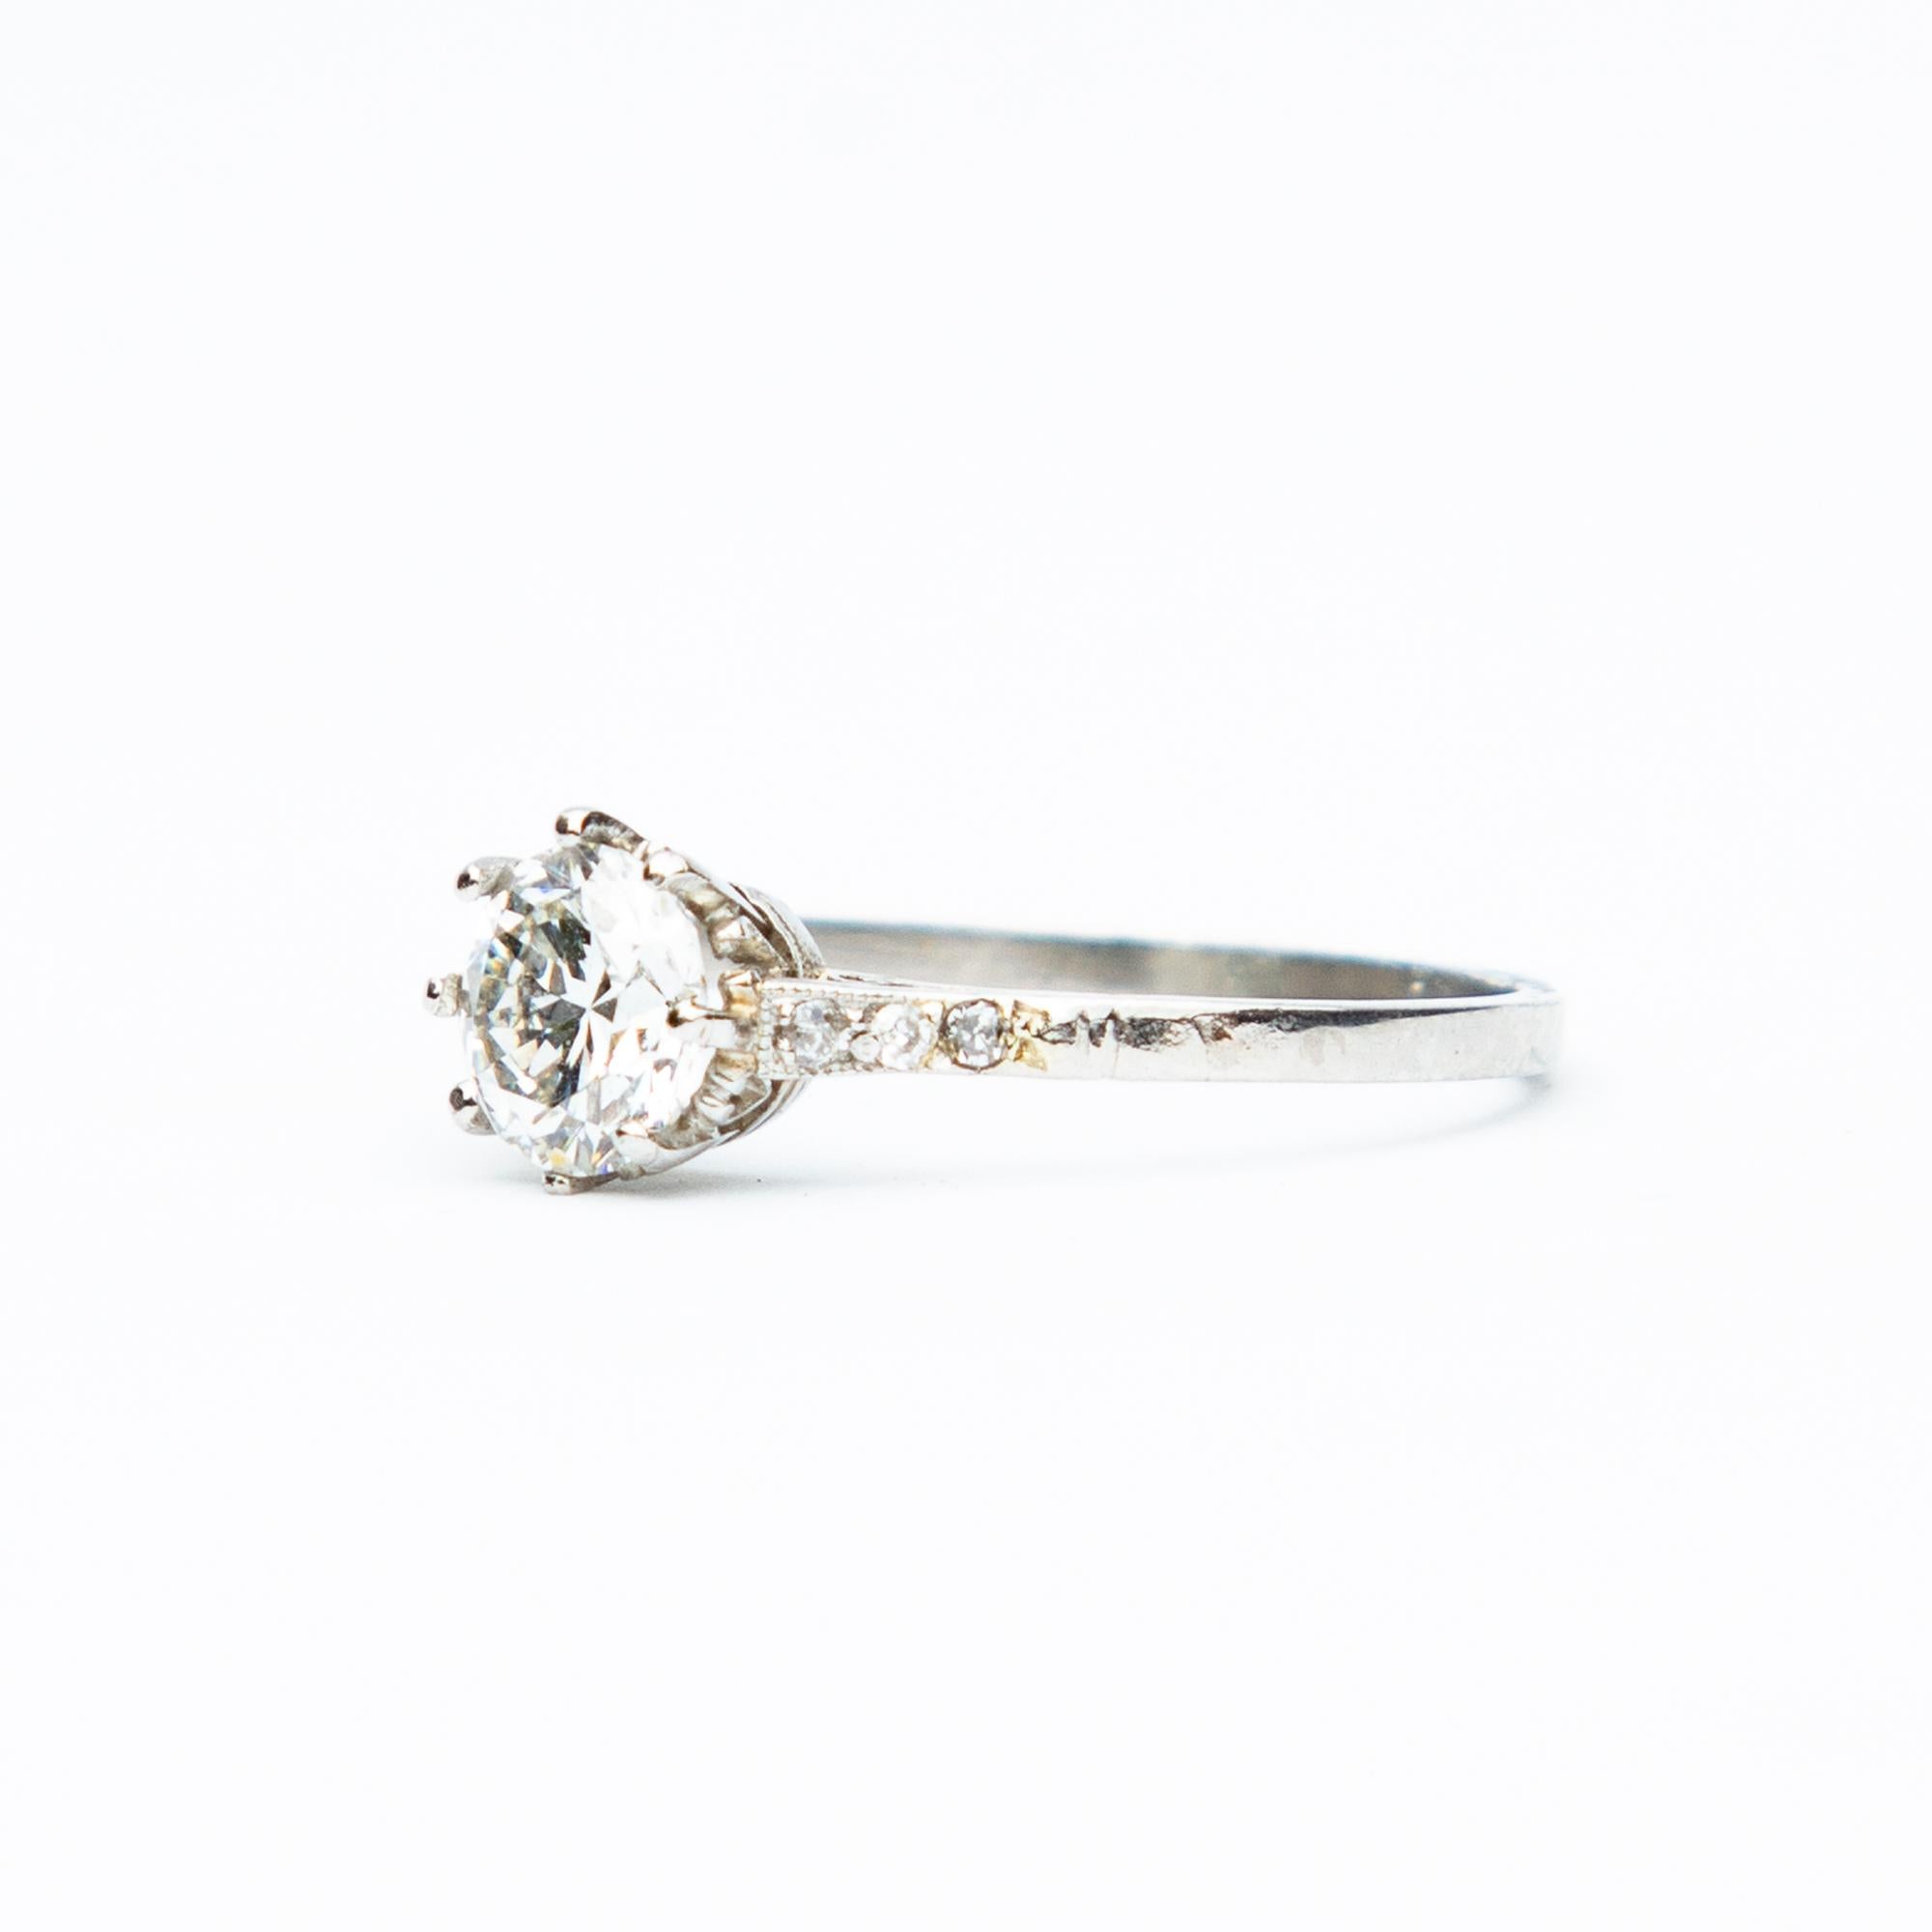 A magnificent example of an Art Deco Diamond solitaire ring, beautifully set with diamond shoulders in an eighteen carat white gold setting. The central Old European Cut diamond measures approximately 1 point 15 carats, G/H in colour and VS2/SI-1 in